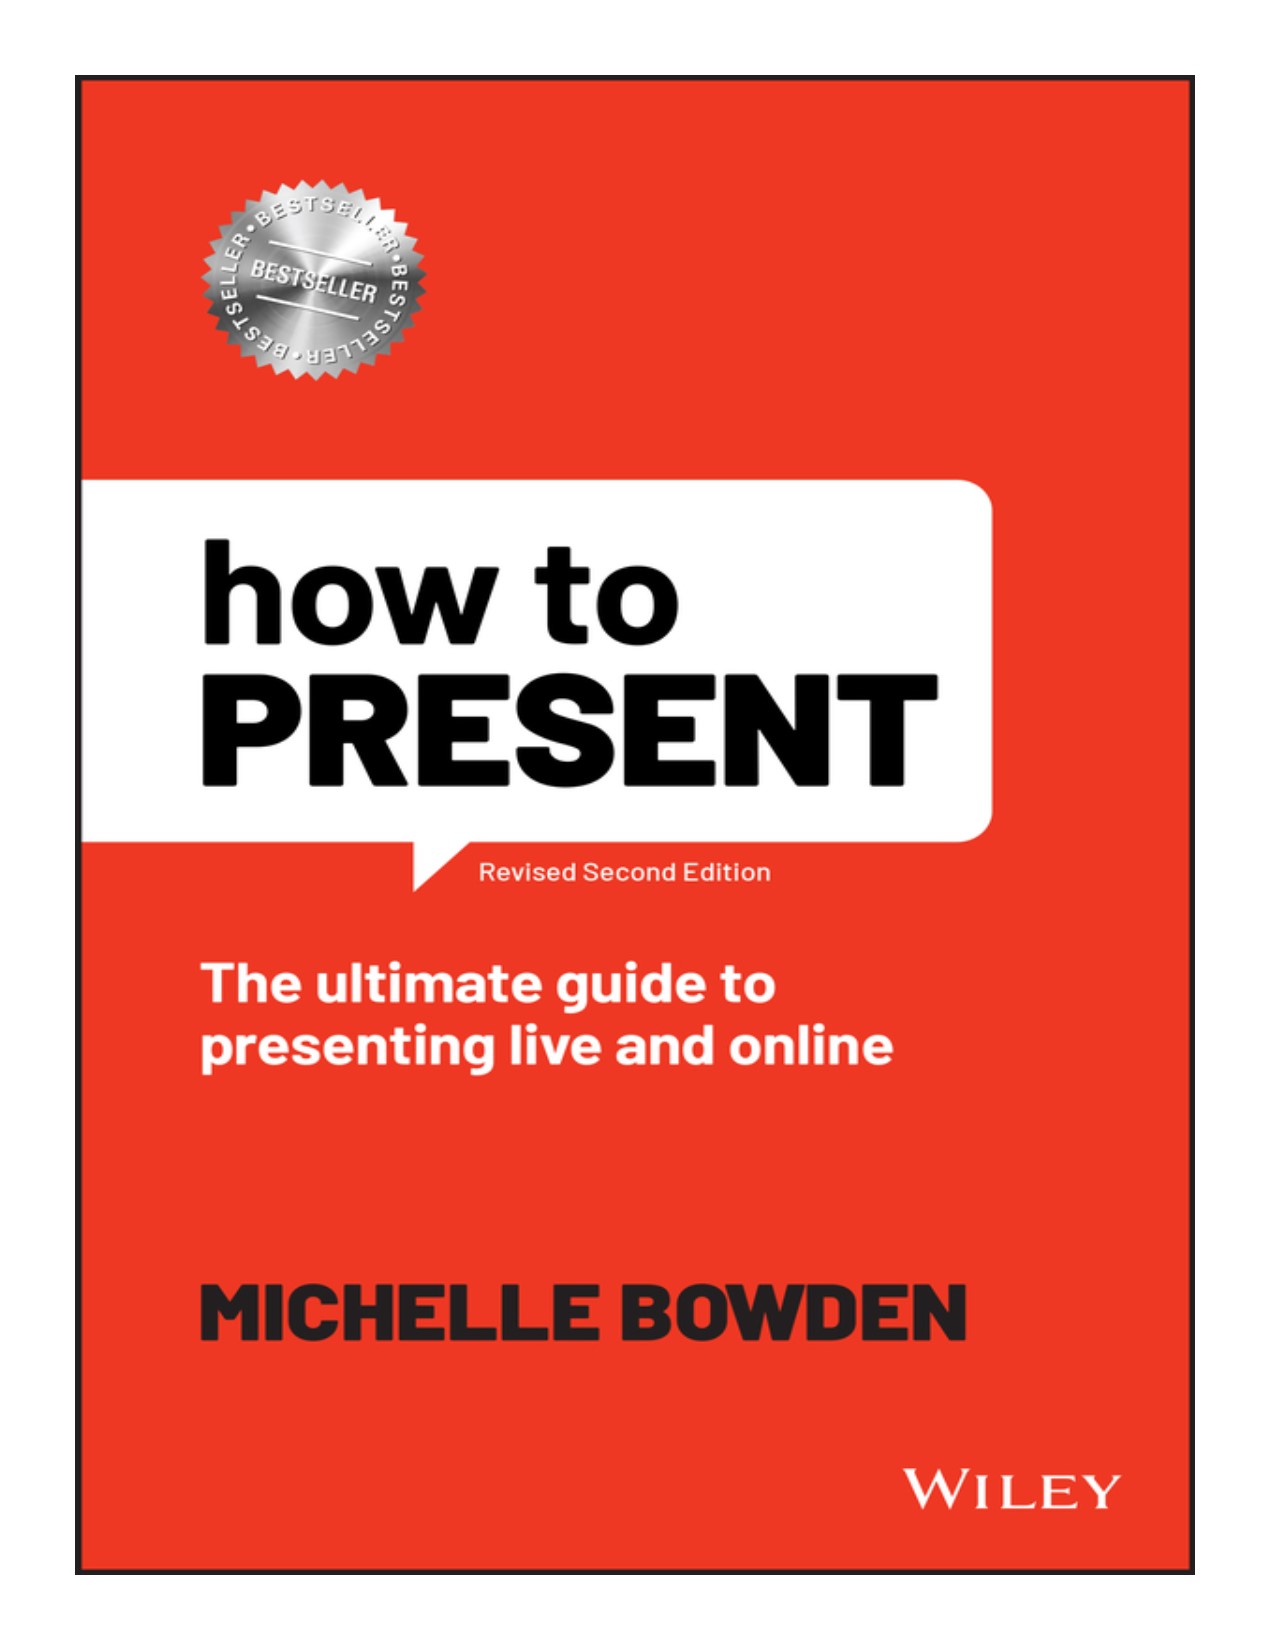 How to present the ultimate guide to presenting live and online